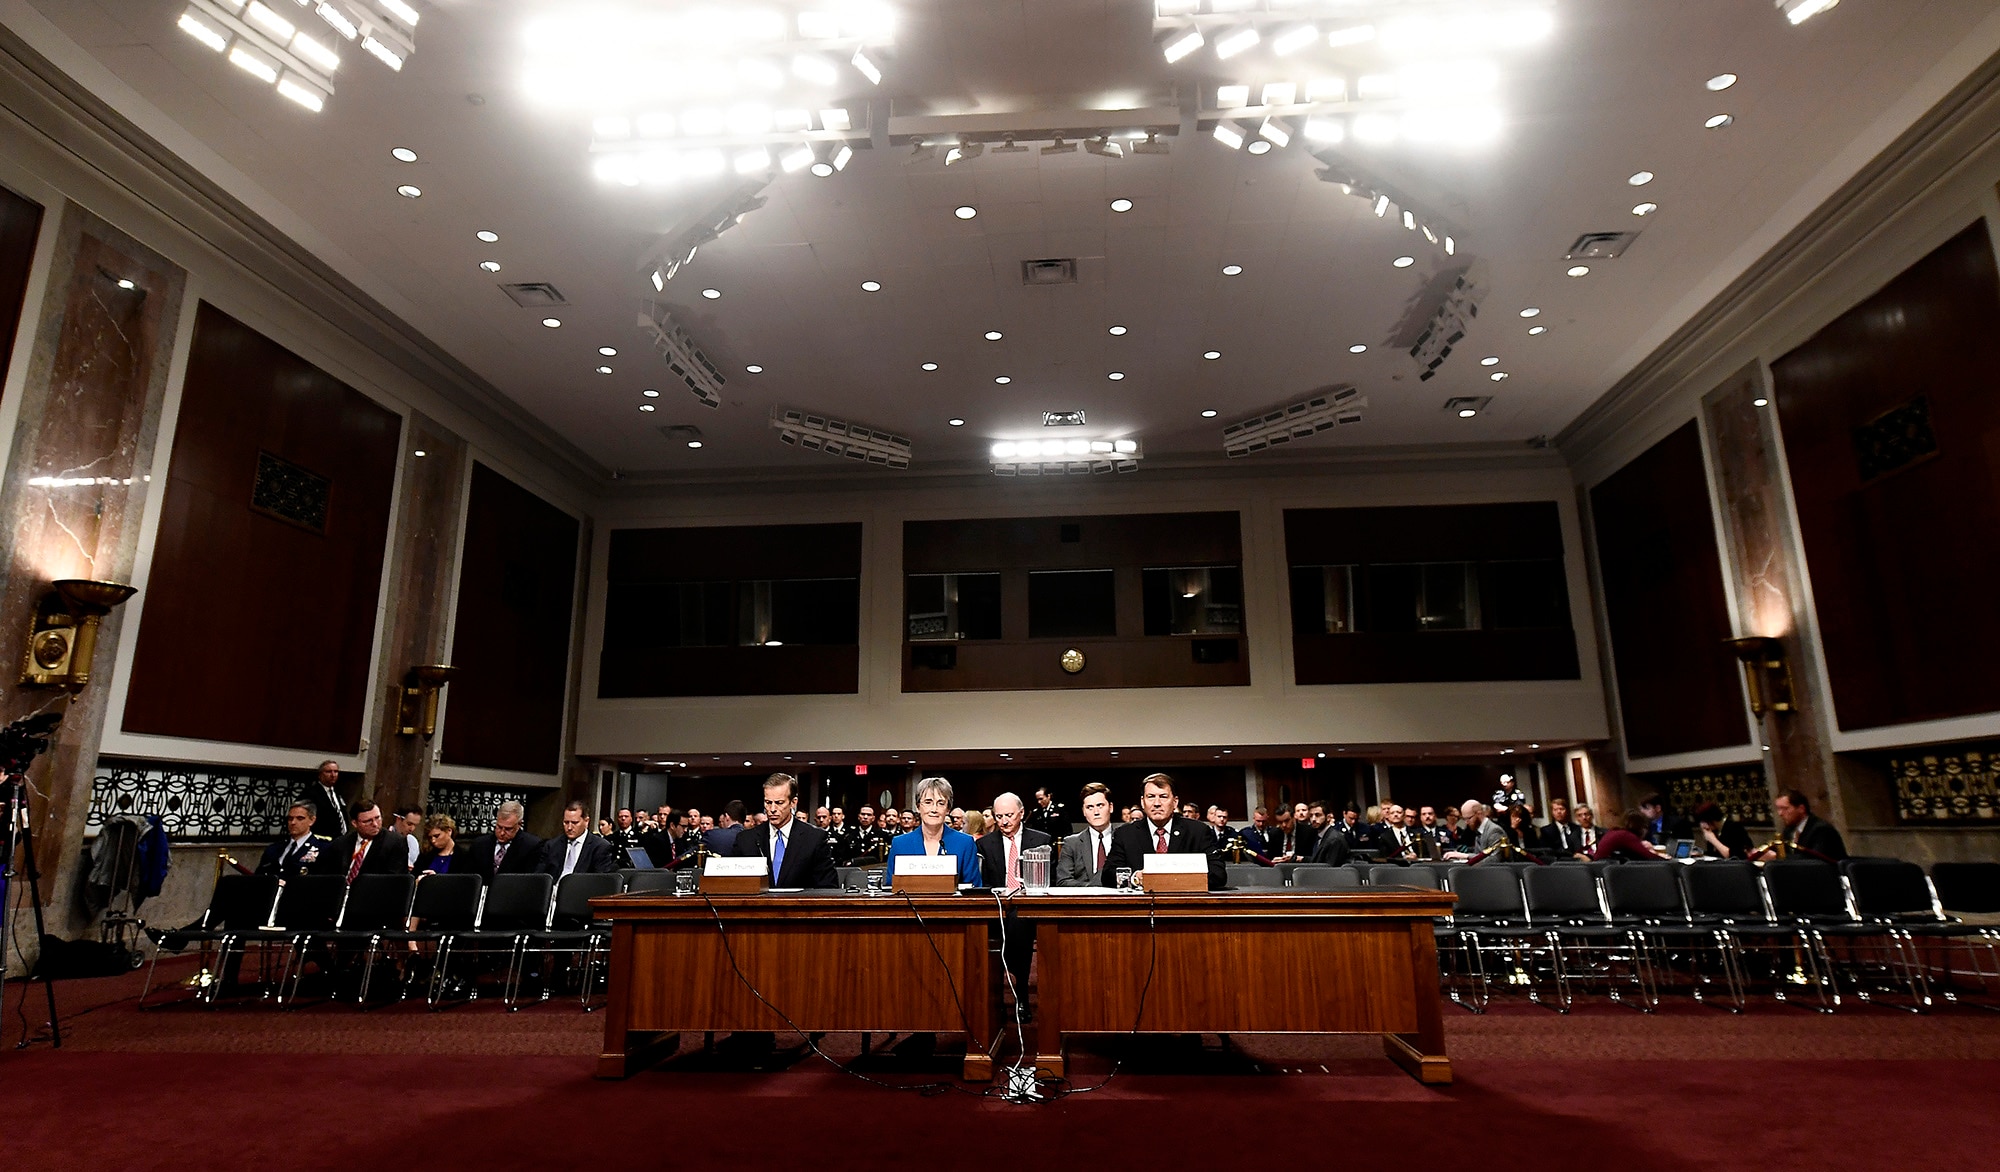 Secretary of the Air Force nominee Heather Wilson testifies before the Senate Armed Services Committee, as a part of the confirmation process March 30, 2017, in Washington, D.C.  Seated with her were Senators John Thune, left, and Mike Rounds, both from South Dakota. (U.S. Air Force photo/Scott M. Ash)